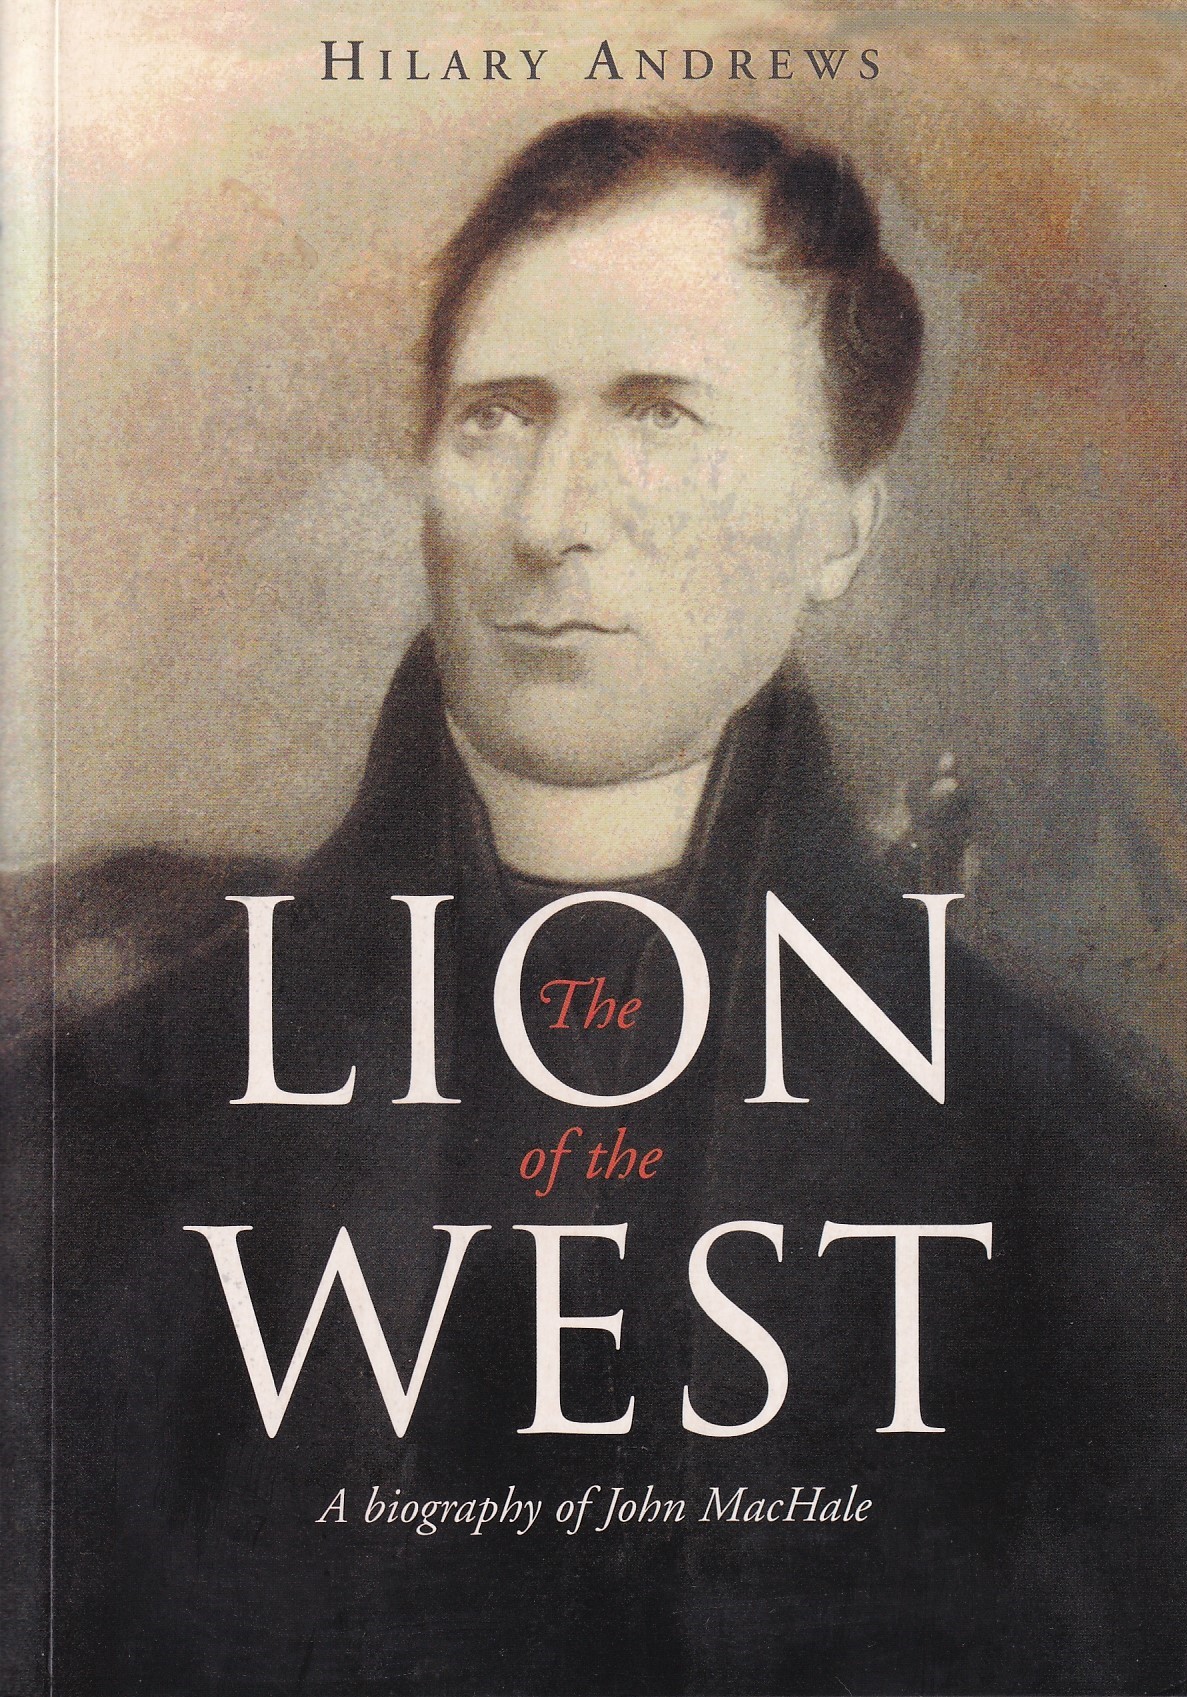 The Lion of the West: A Biography of John MacHale by Hilary Andrews